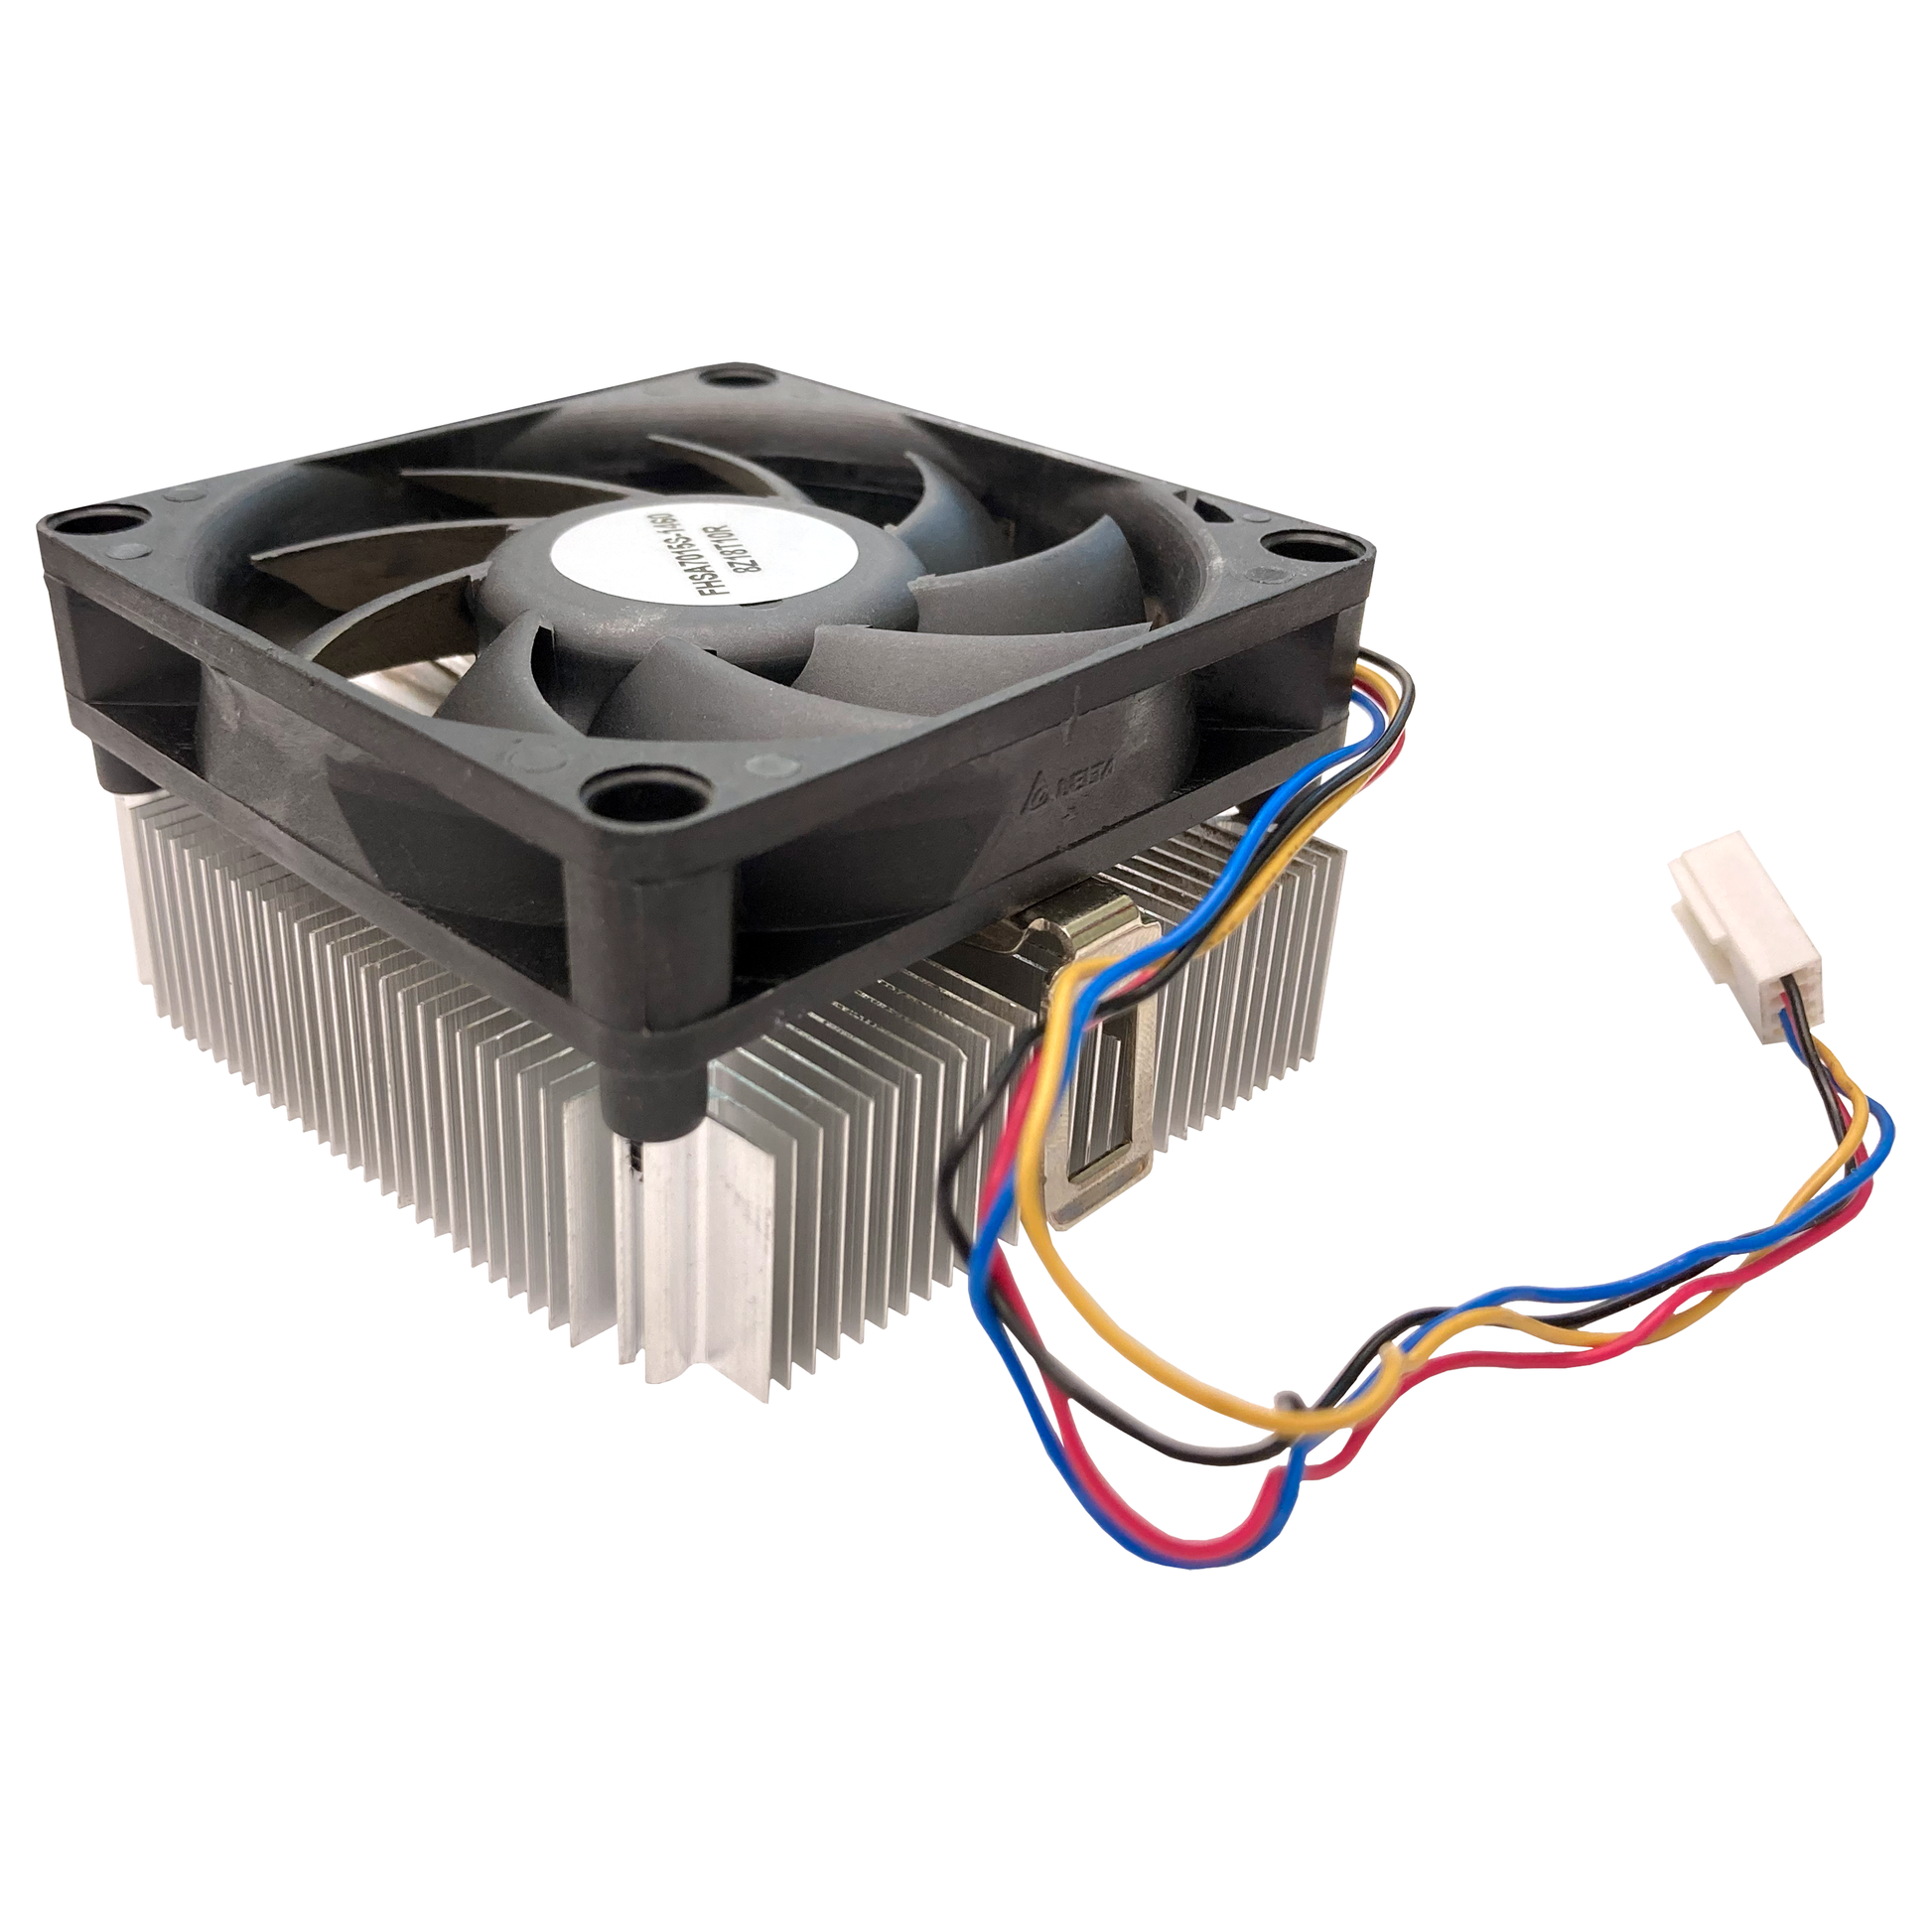 Motherboard Fan with Heatsink. Sold by Miele Manufacturing.